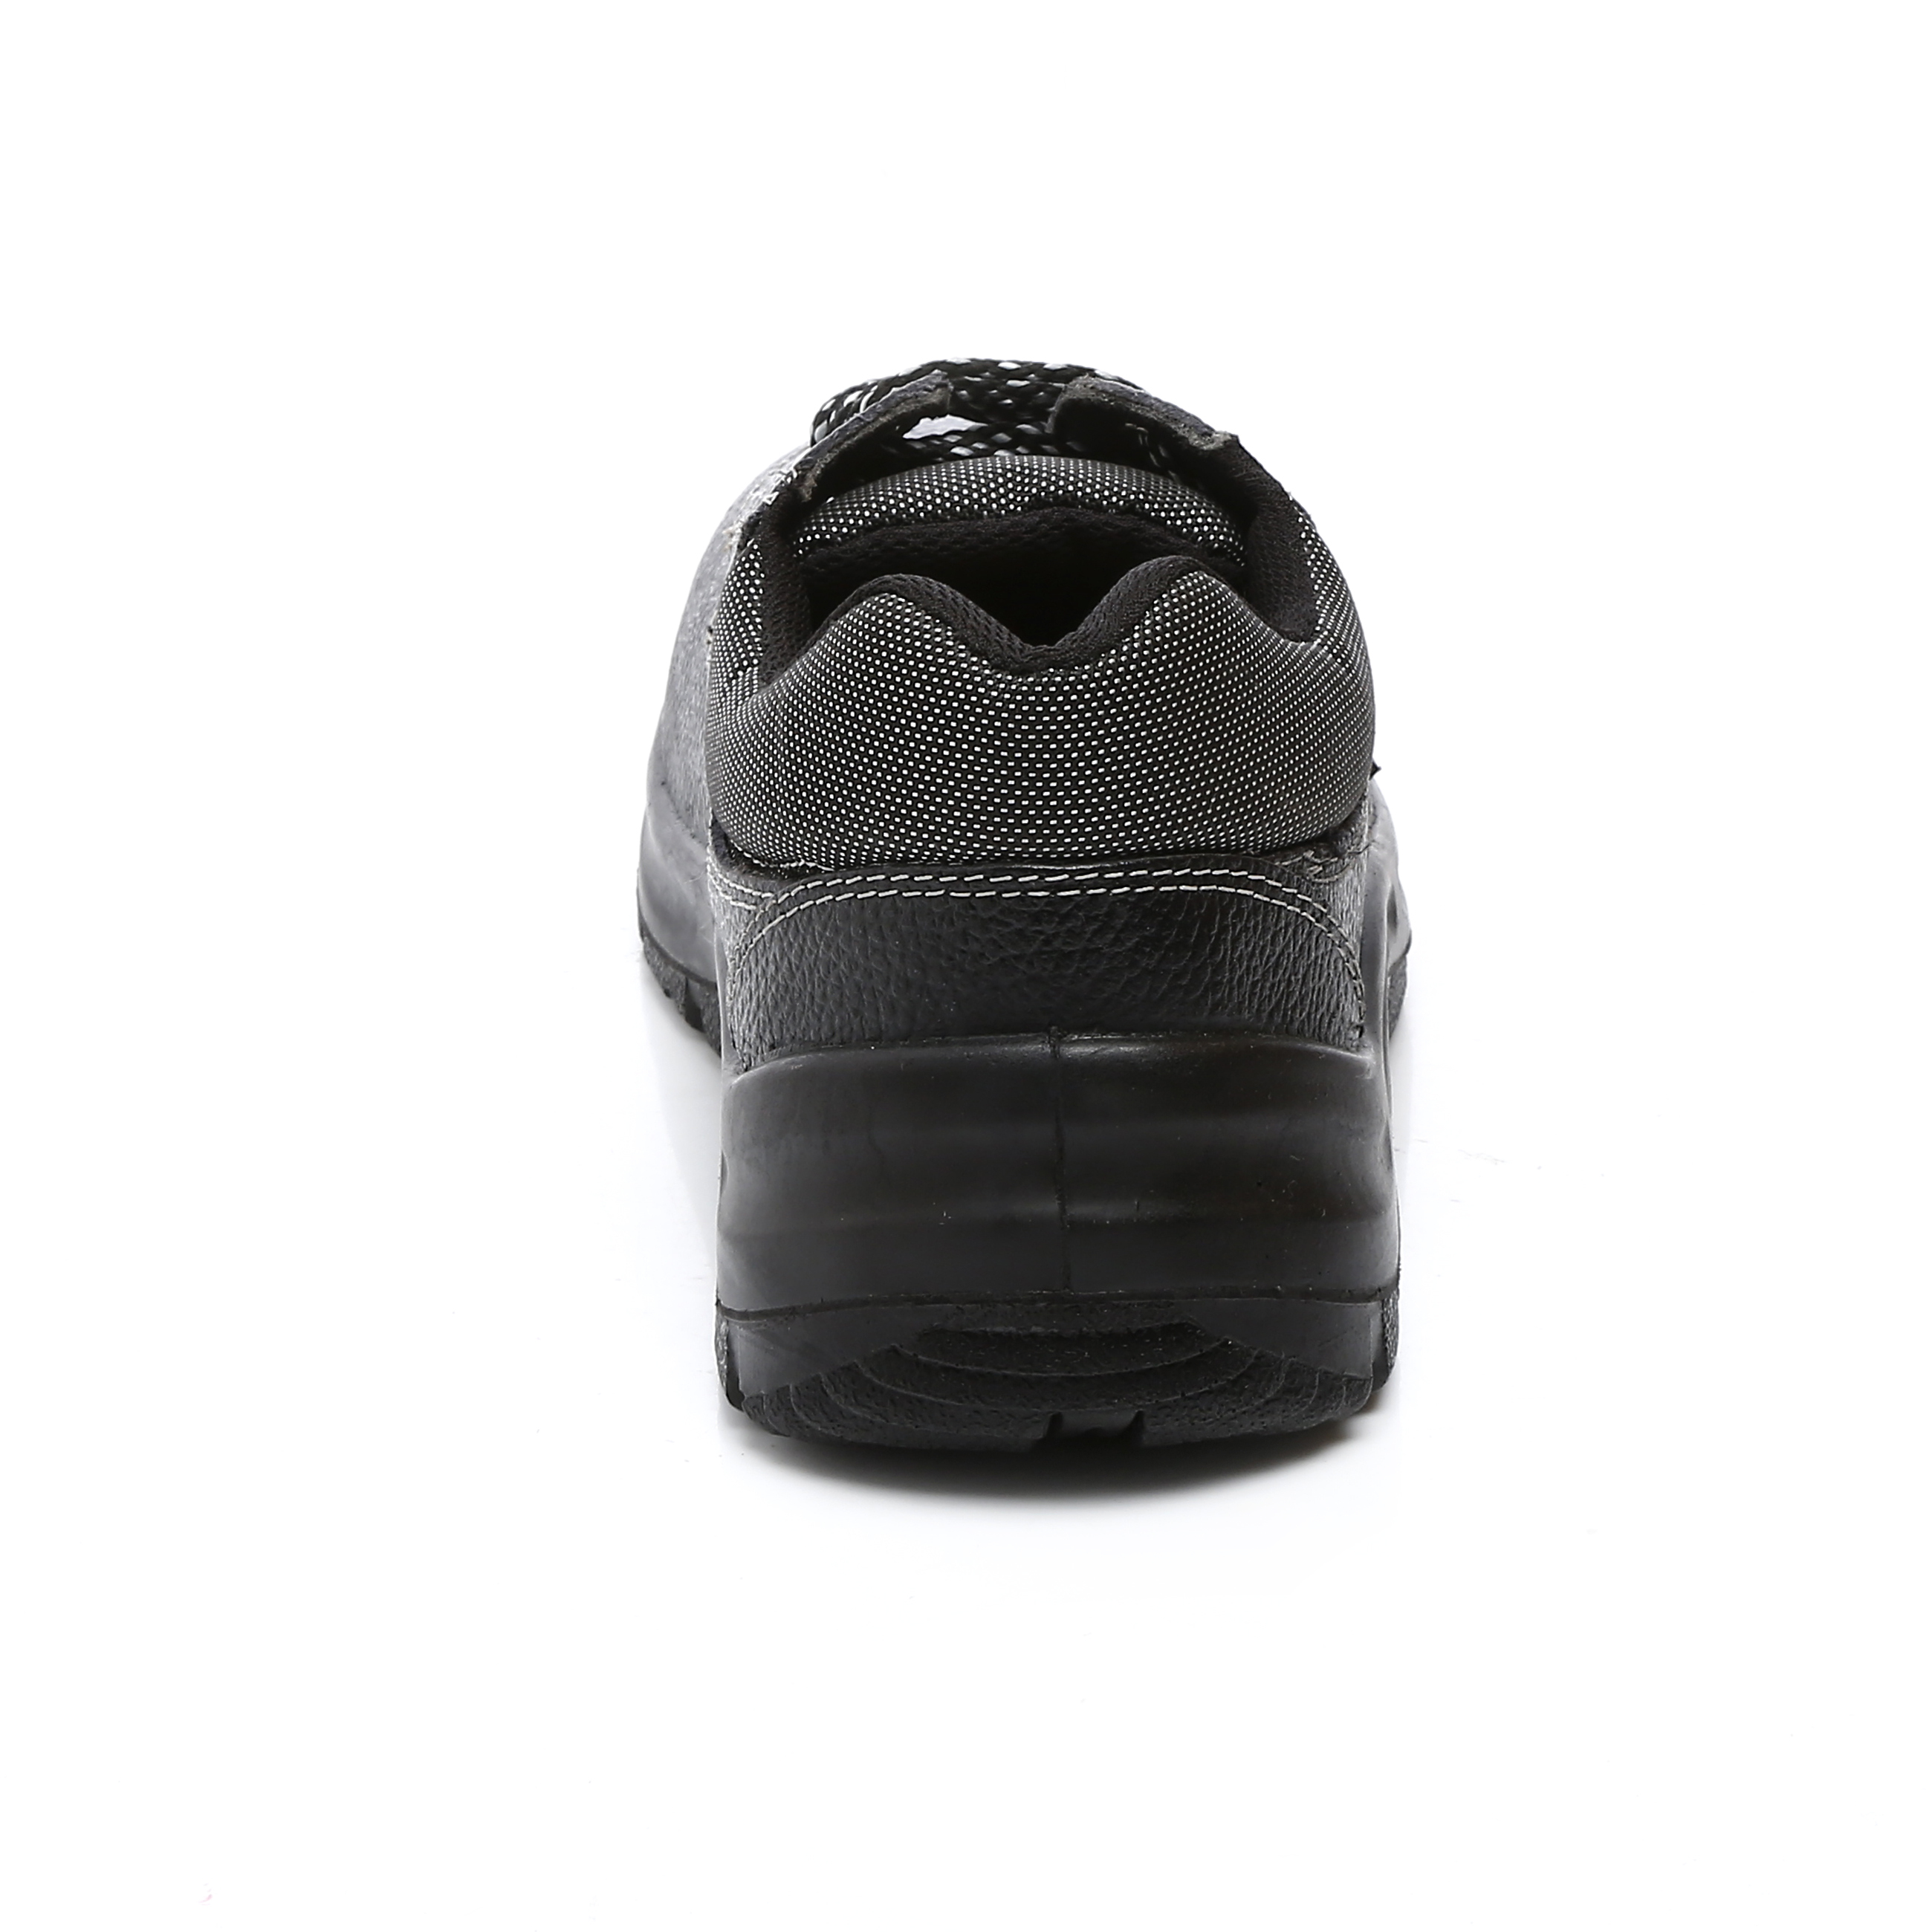 Genuine Leather PU Safety Shoes